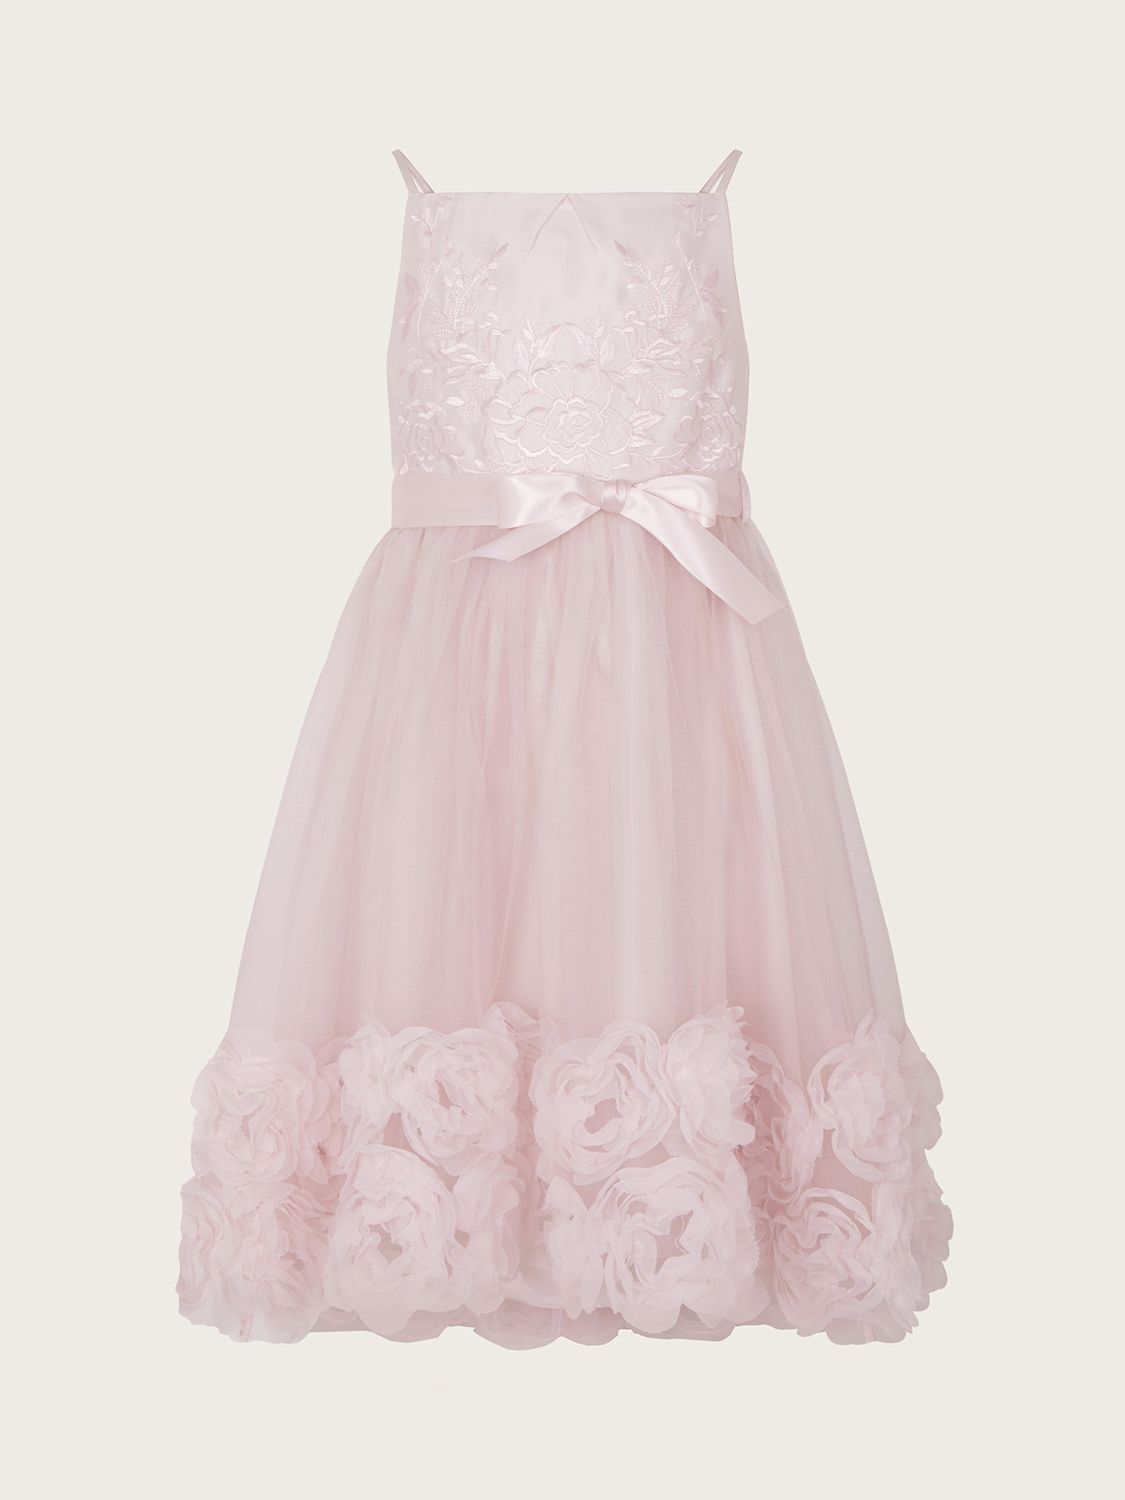 Monsoon Kid's Odette Blossom Dress, Pink, 3 years